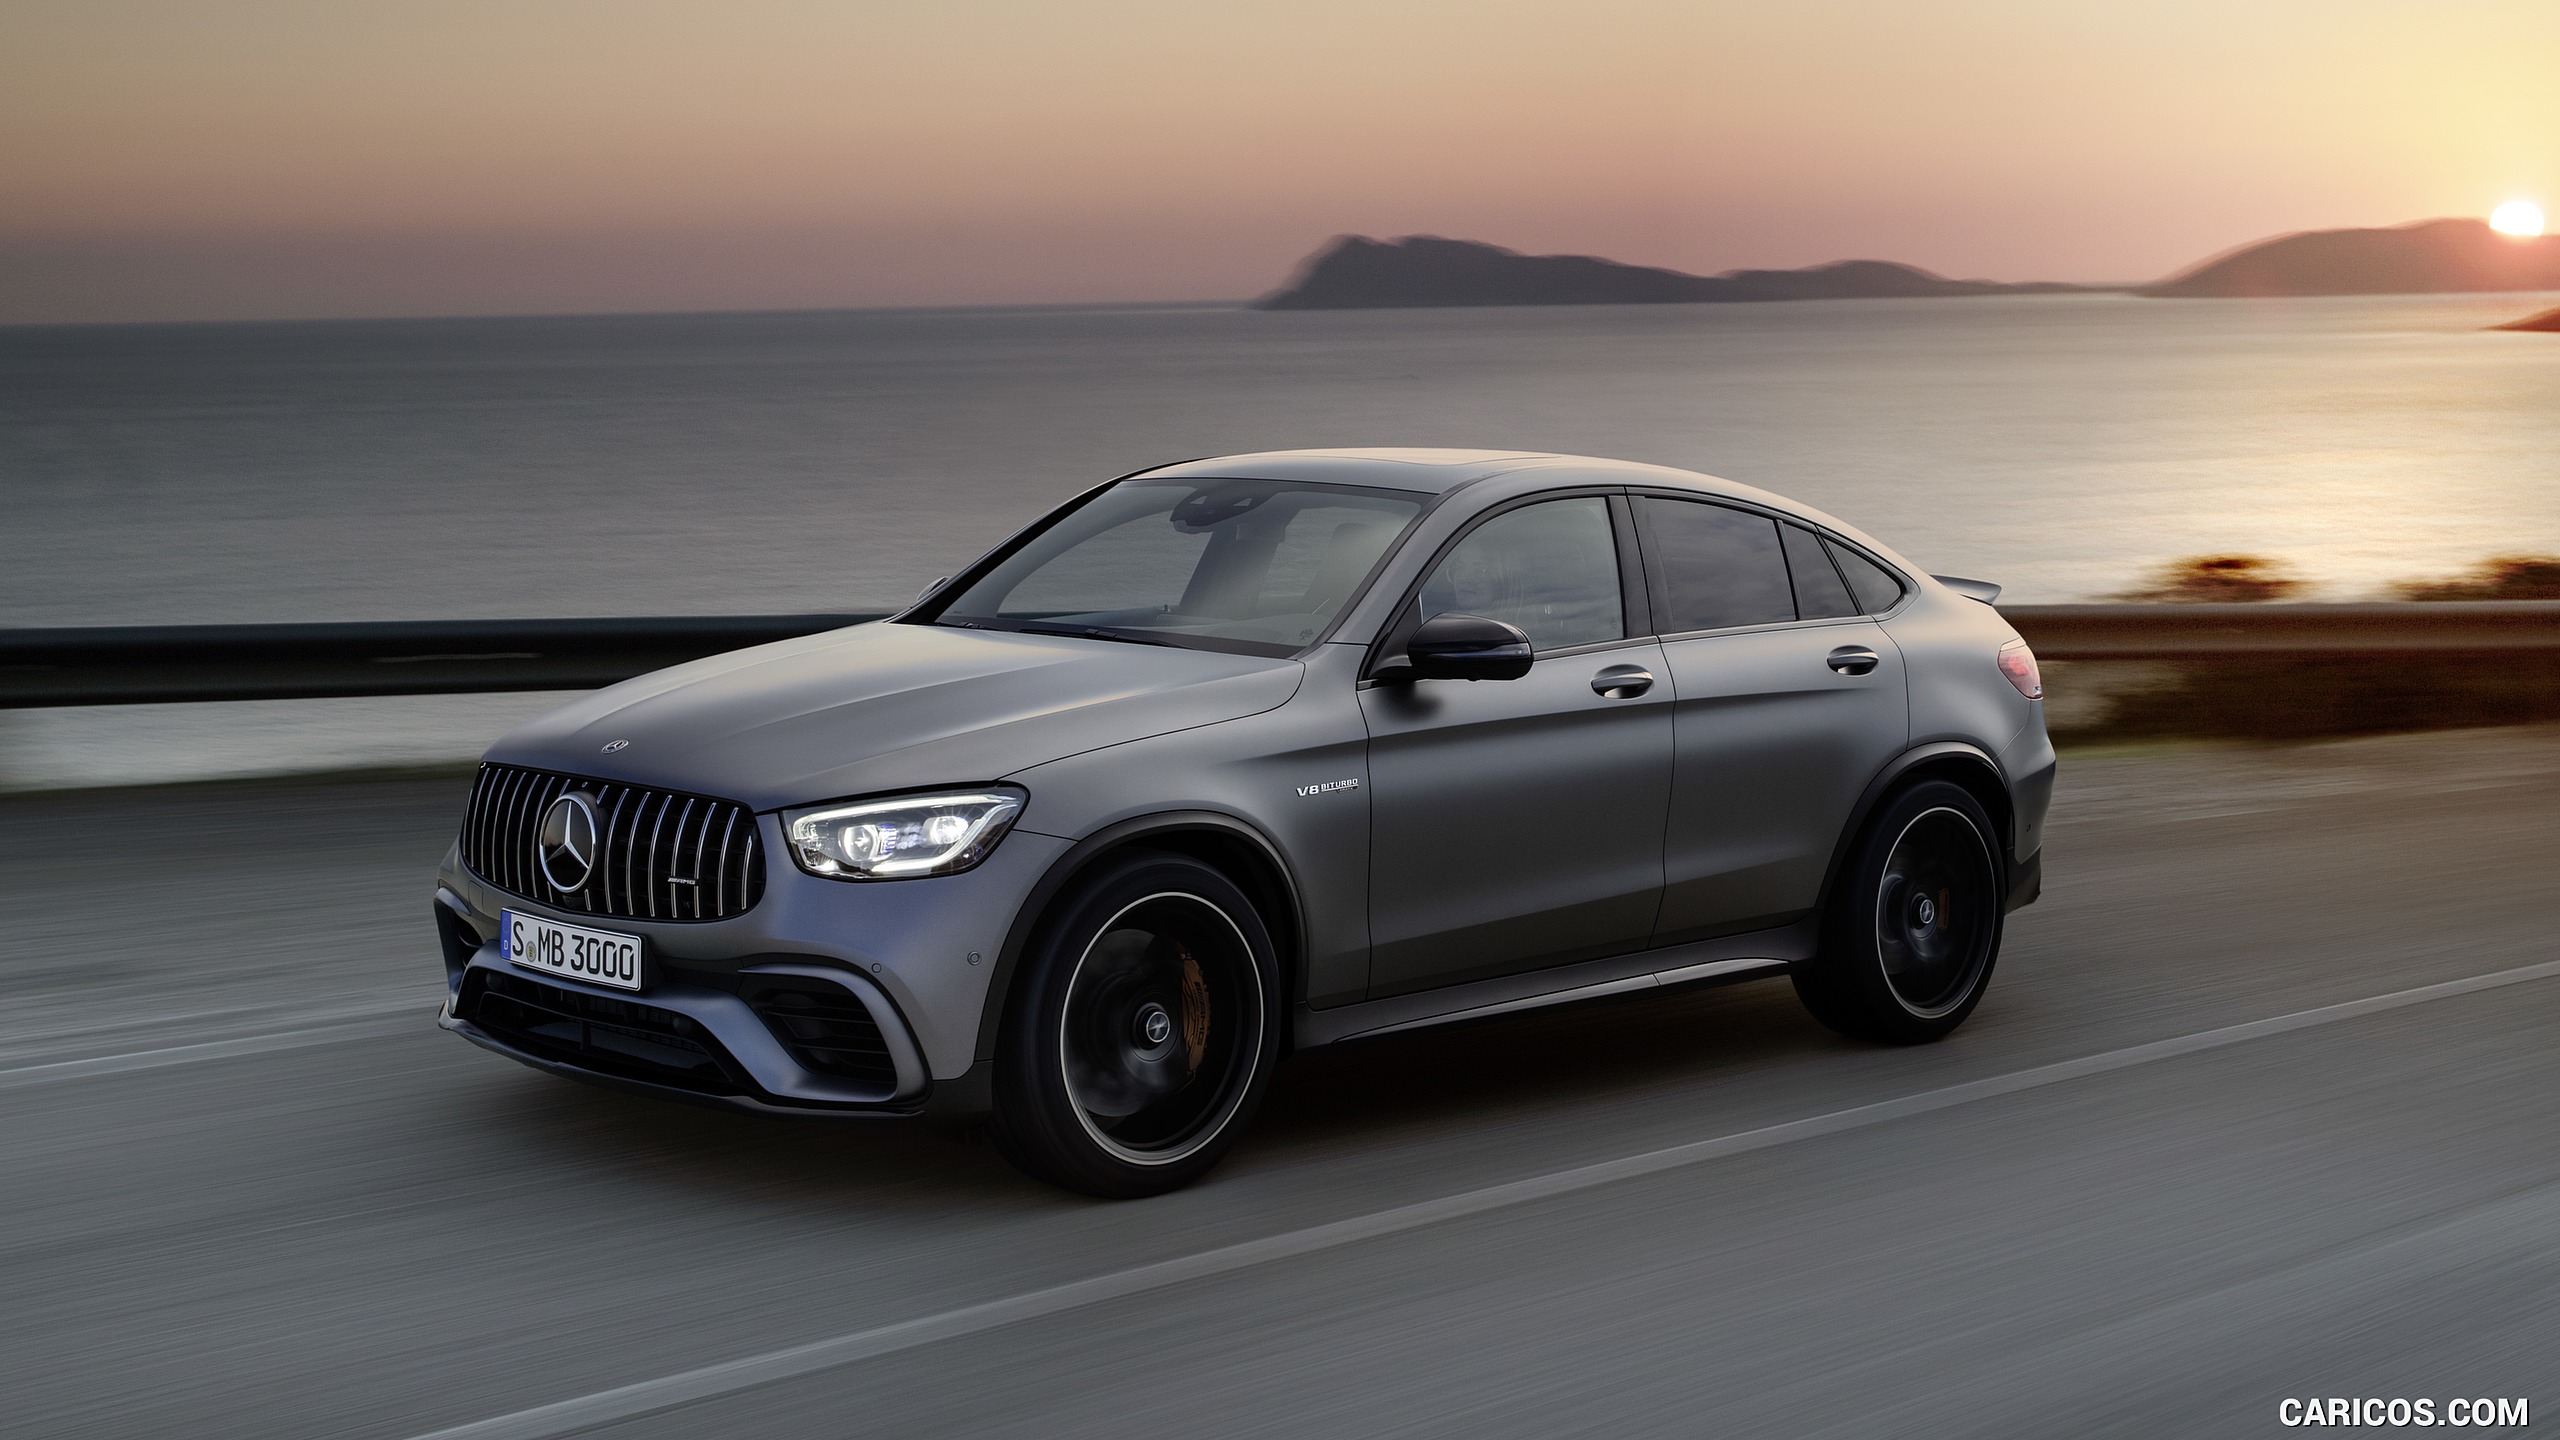 2020 Mercedes-AMG GLC 63 S 4MATIC+ Coupe - Front Three-Quarter, #1 of 102